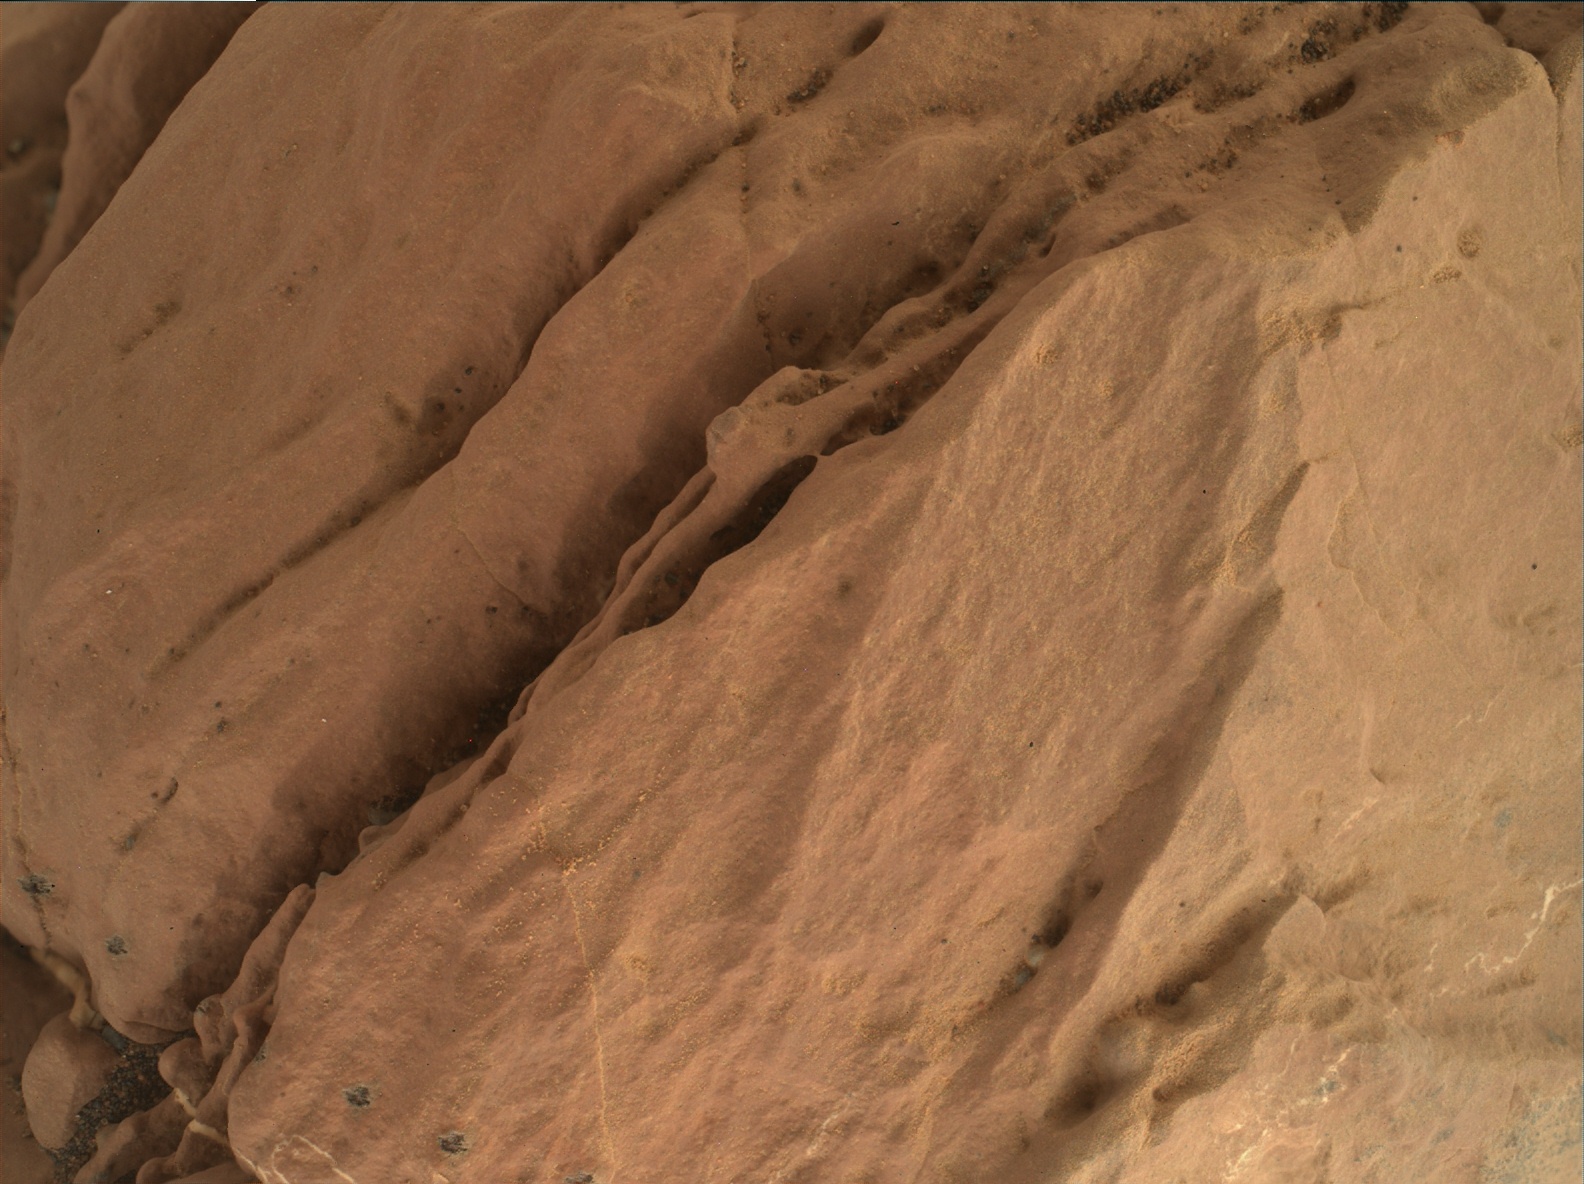 Nasa's Mars rover Curiosity acquired this image using its Mars Hand Lens Imager (MAHLI) on Sol 1605